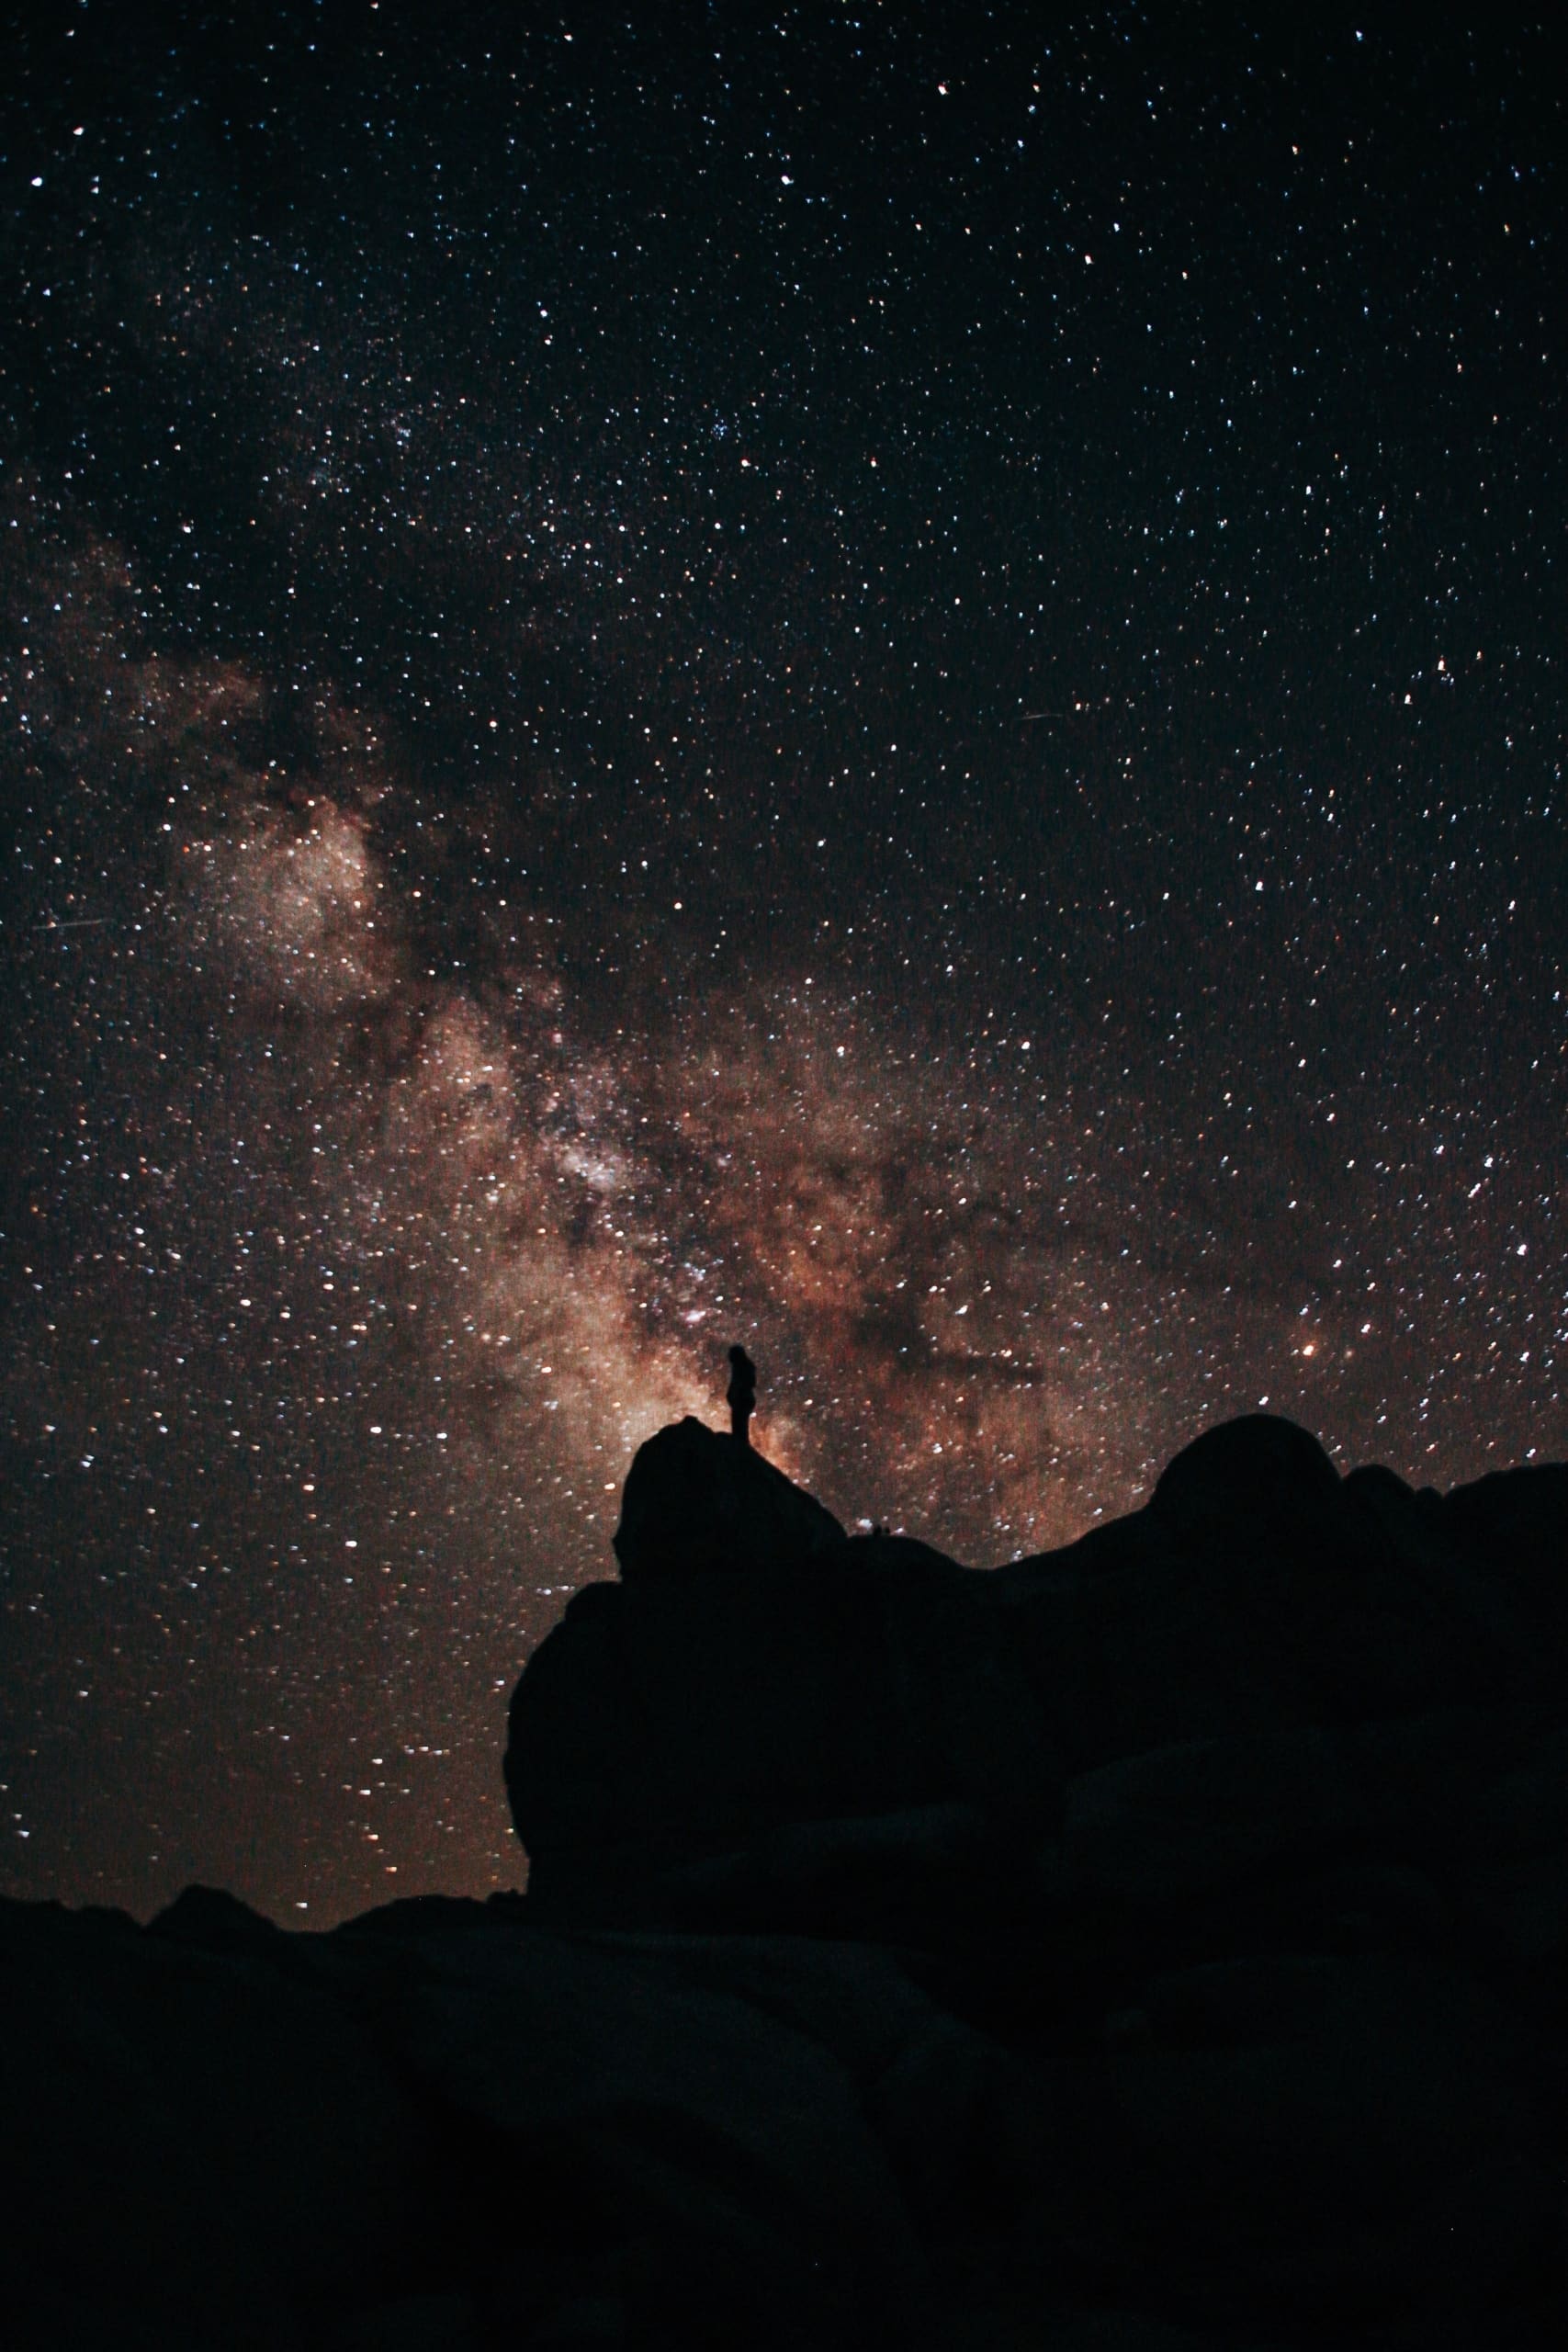 A picture of a person standing under the Milky Way at night milky way galaxy star shot wilderness